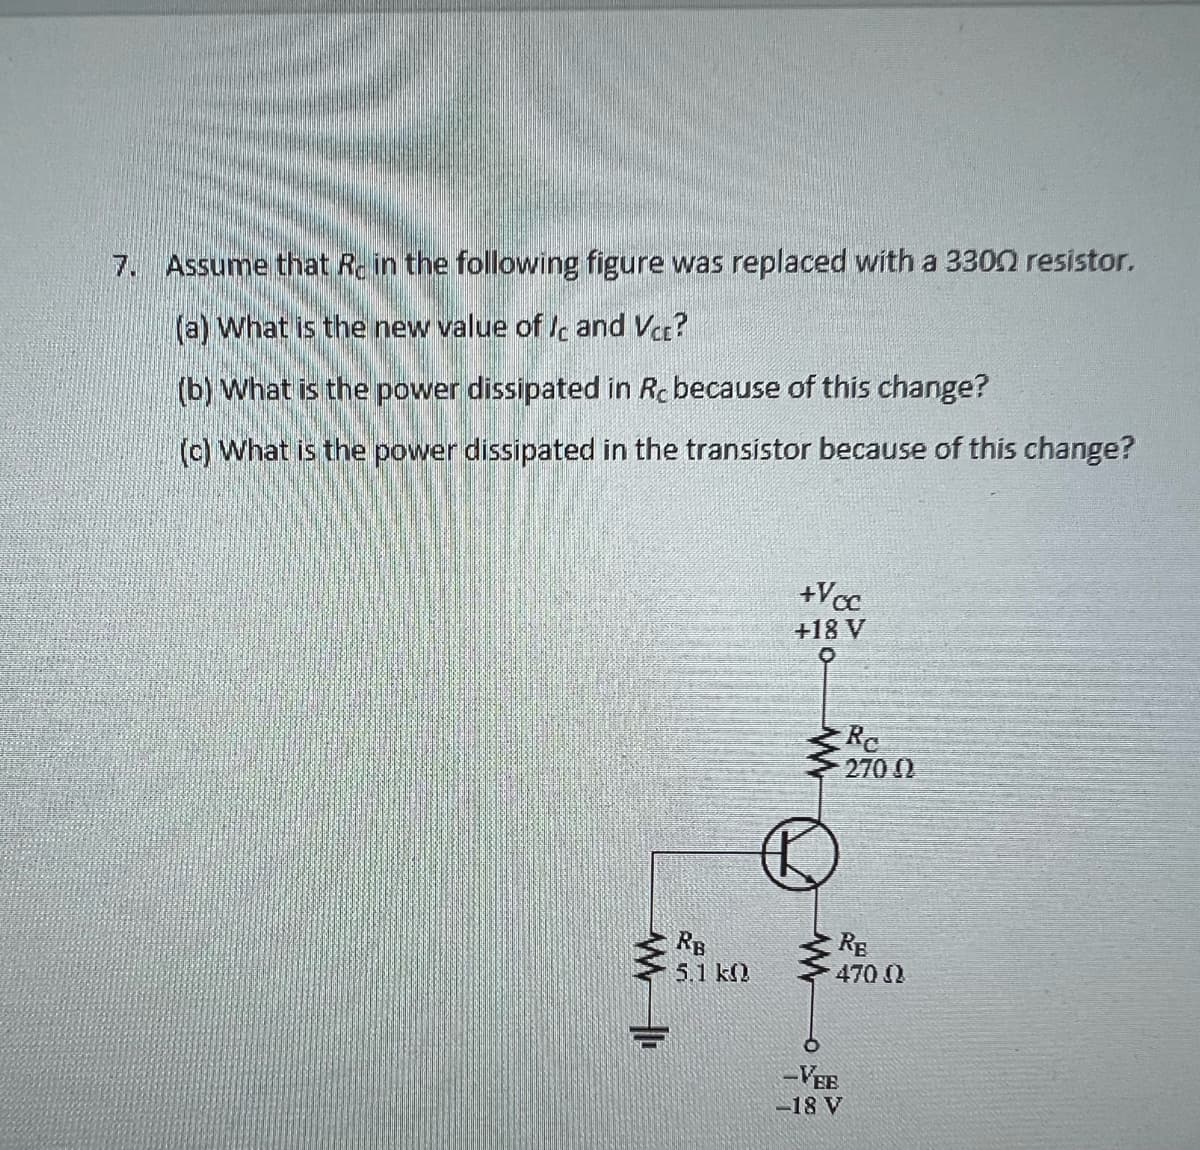 7. Assume that Re in the following figure was replaced with a 3300 resistor.
(a) What is the new value of Ic and Vcc?
(b) What is the power dissipated in Rc because of this change?
(c) What is the power dissipated in the transistor because of this change?
RS
RB
26
5.1 k
+Vcc
+18 V
O
Re
2700
RE
470 Ω
-VEE
-18 V